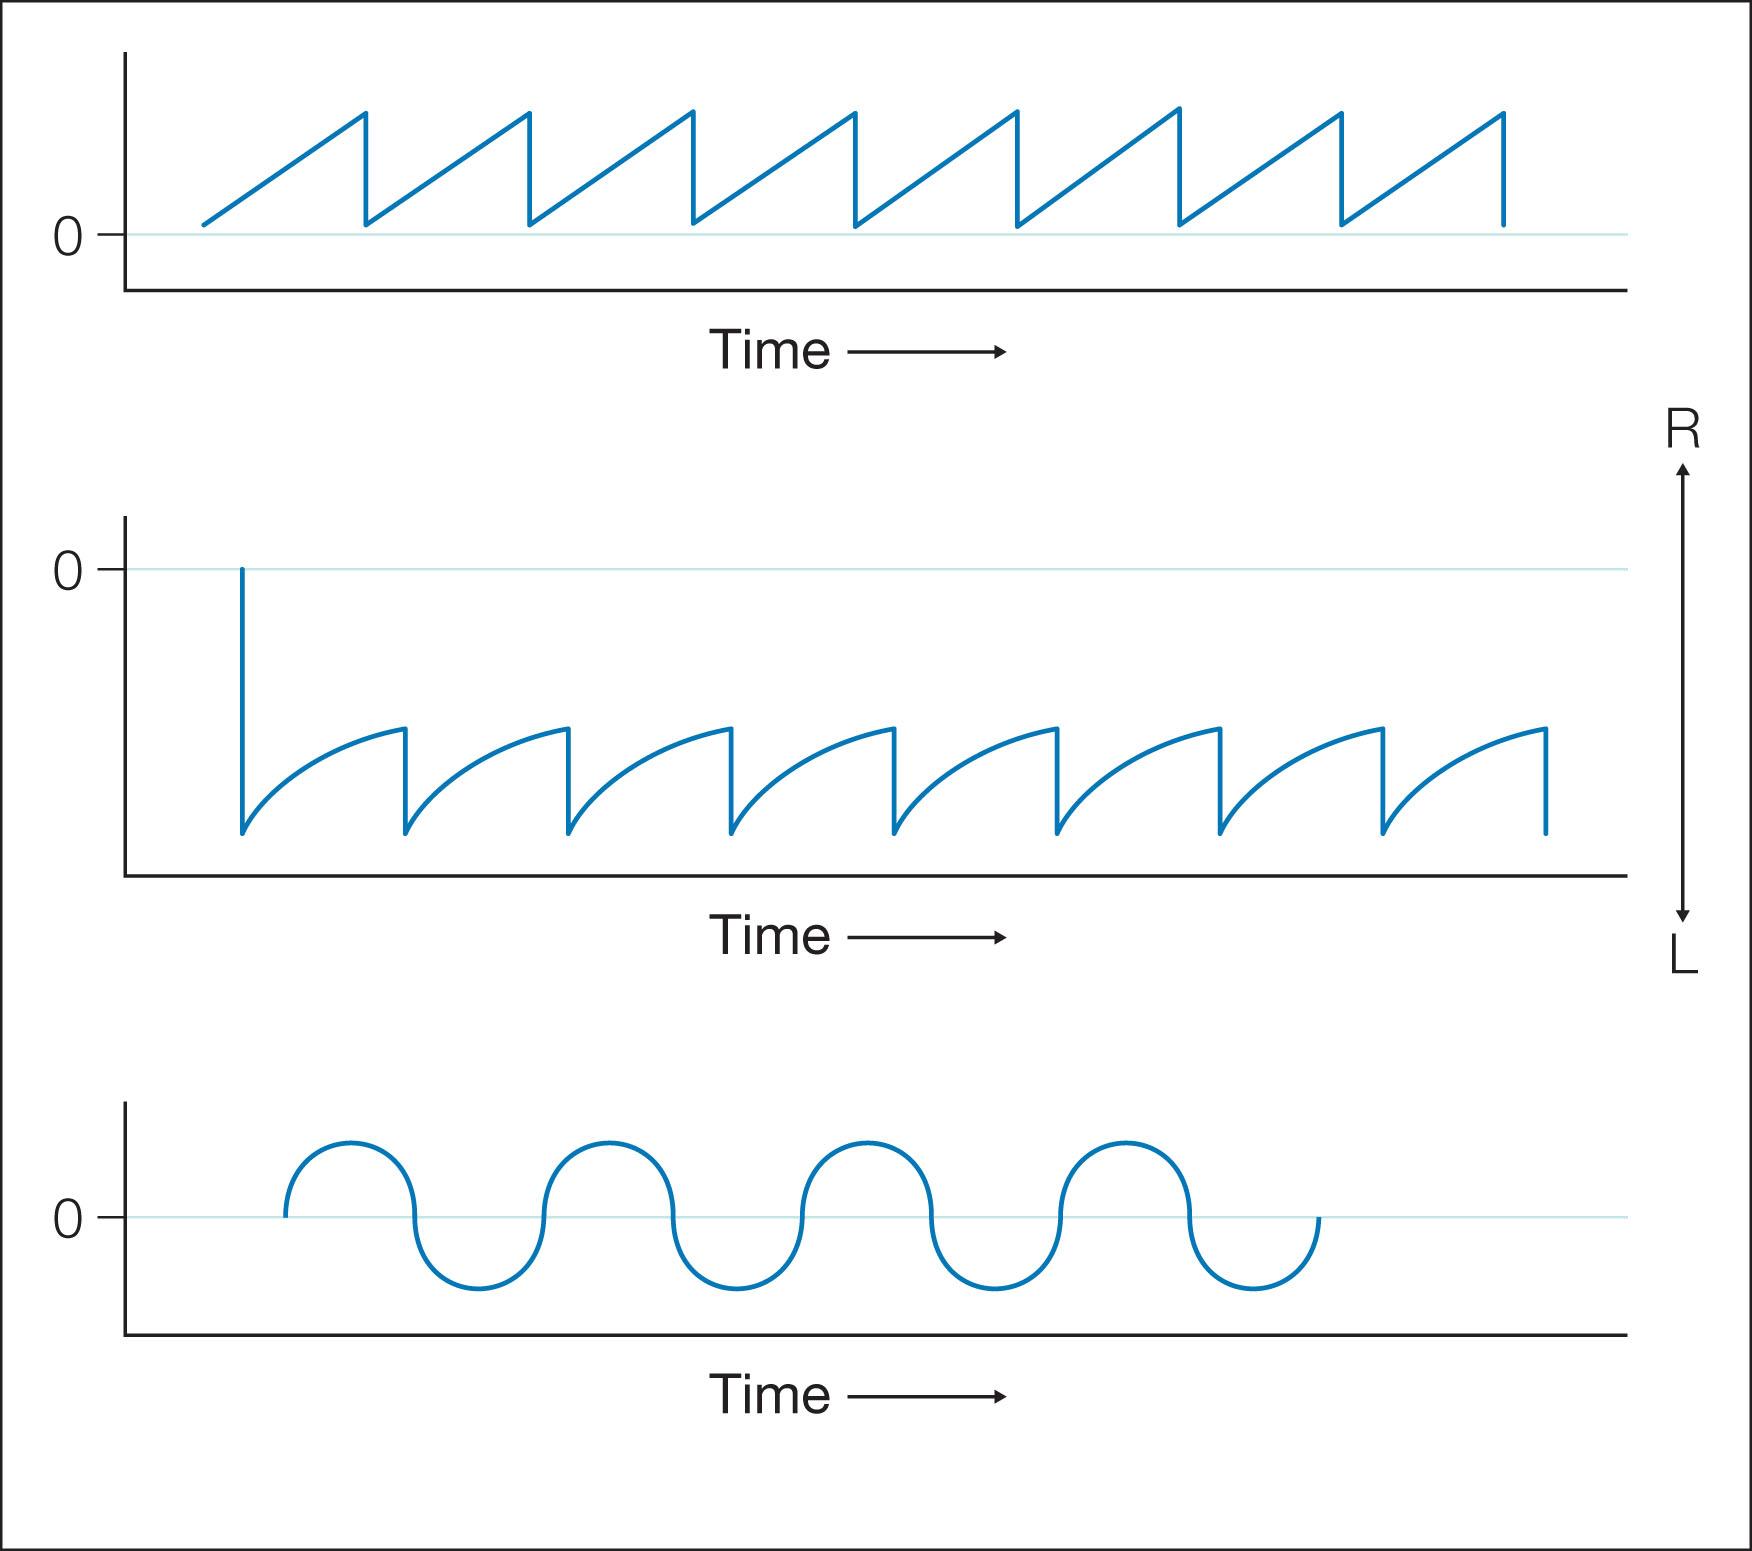 Fig. 91.7, Ocular oscillations. Artist's representation of major types of nystagmus waveforms. Continuous periods of time are depicted in each tracing. Rightward eye movements are up and leftward eye movements are down. The top trace shows pure jerk left nystagmus with linear slow phases to the left interrupting fixation in primary position. The middle trace shows jerk left nystagmus in left gaze with decreasing velocity slow phases. The bottom trace shows pure pendular nystagmus interrupting primary position fixation.